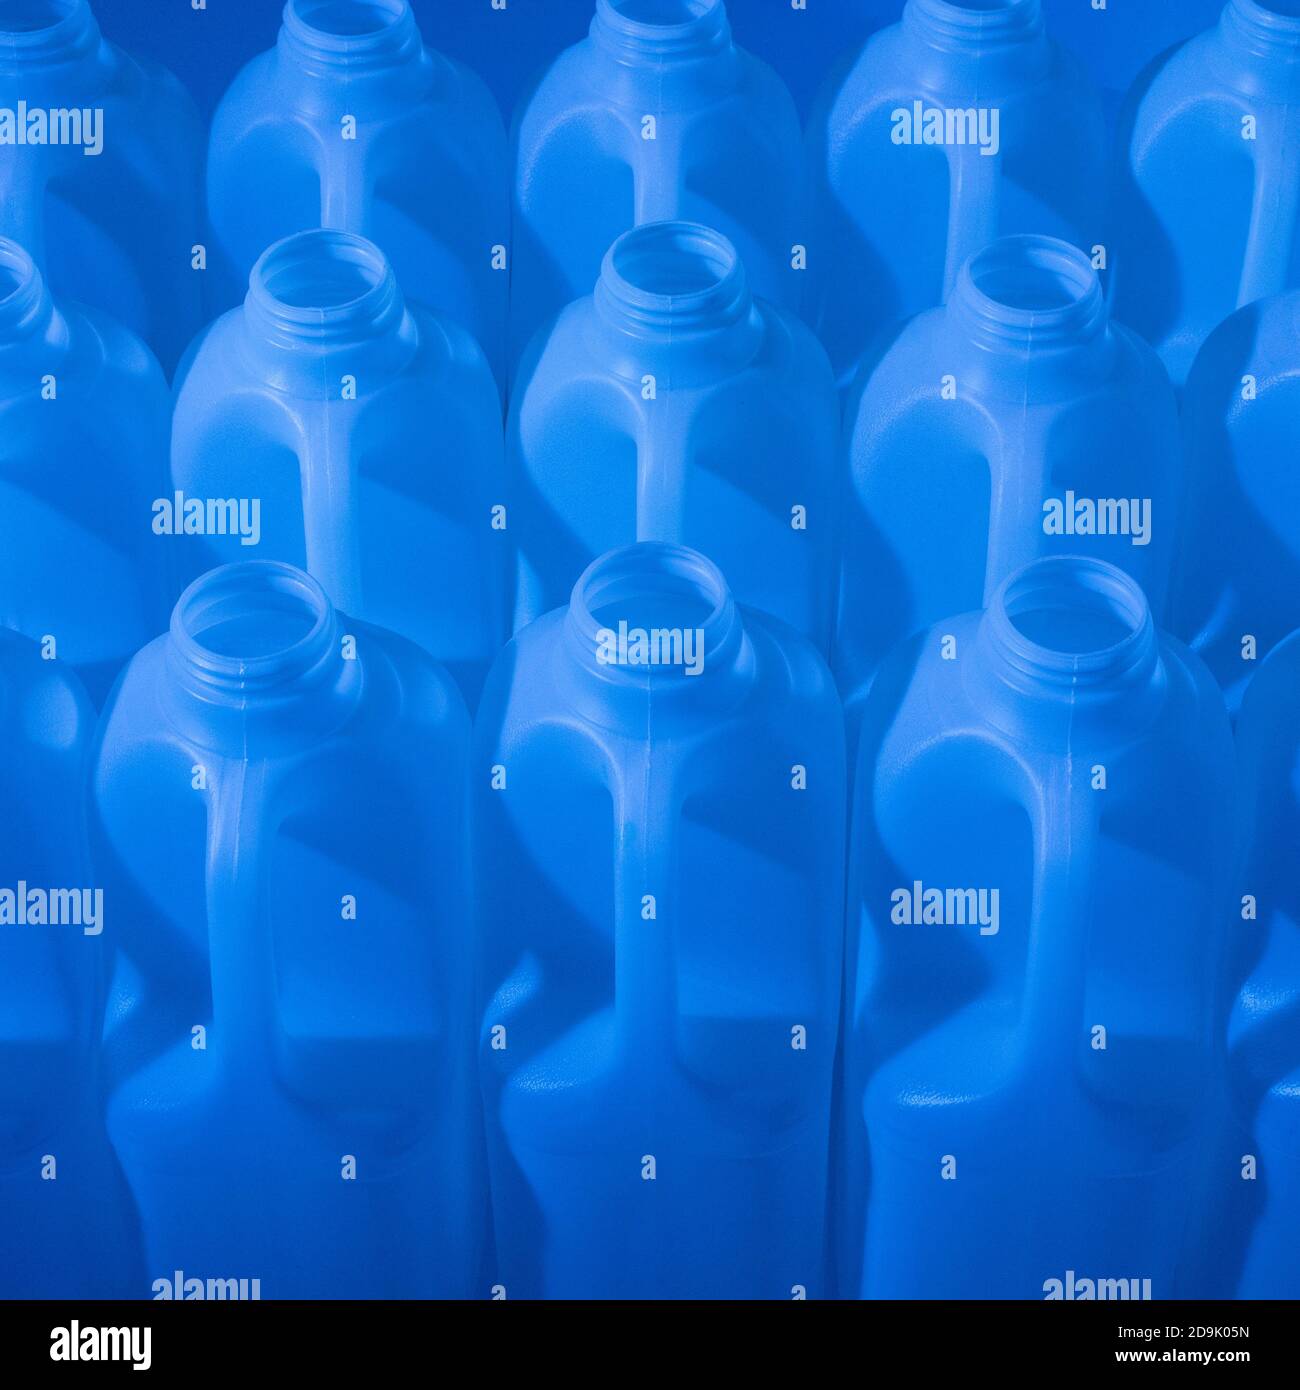 Nampak 2-litre poly HDPE milk bottles lit by coloured gels. Abstract packaging, plastic bottles, UK food packaging, supermarket milk, abstract plastic. Stock Photo